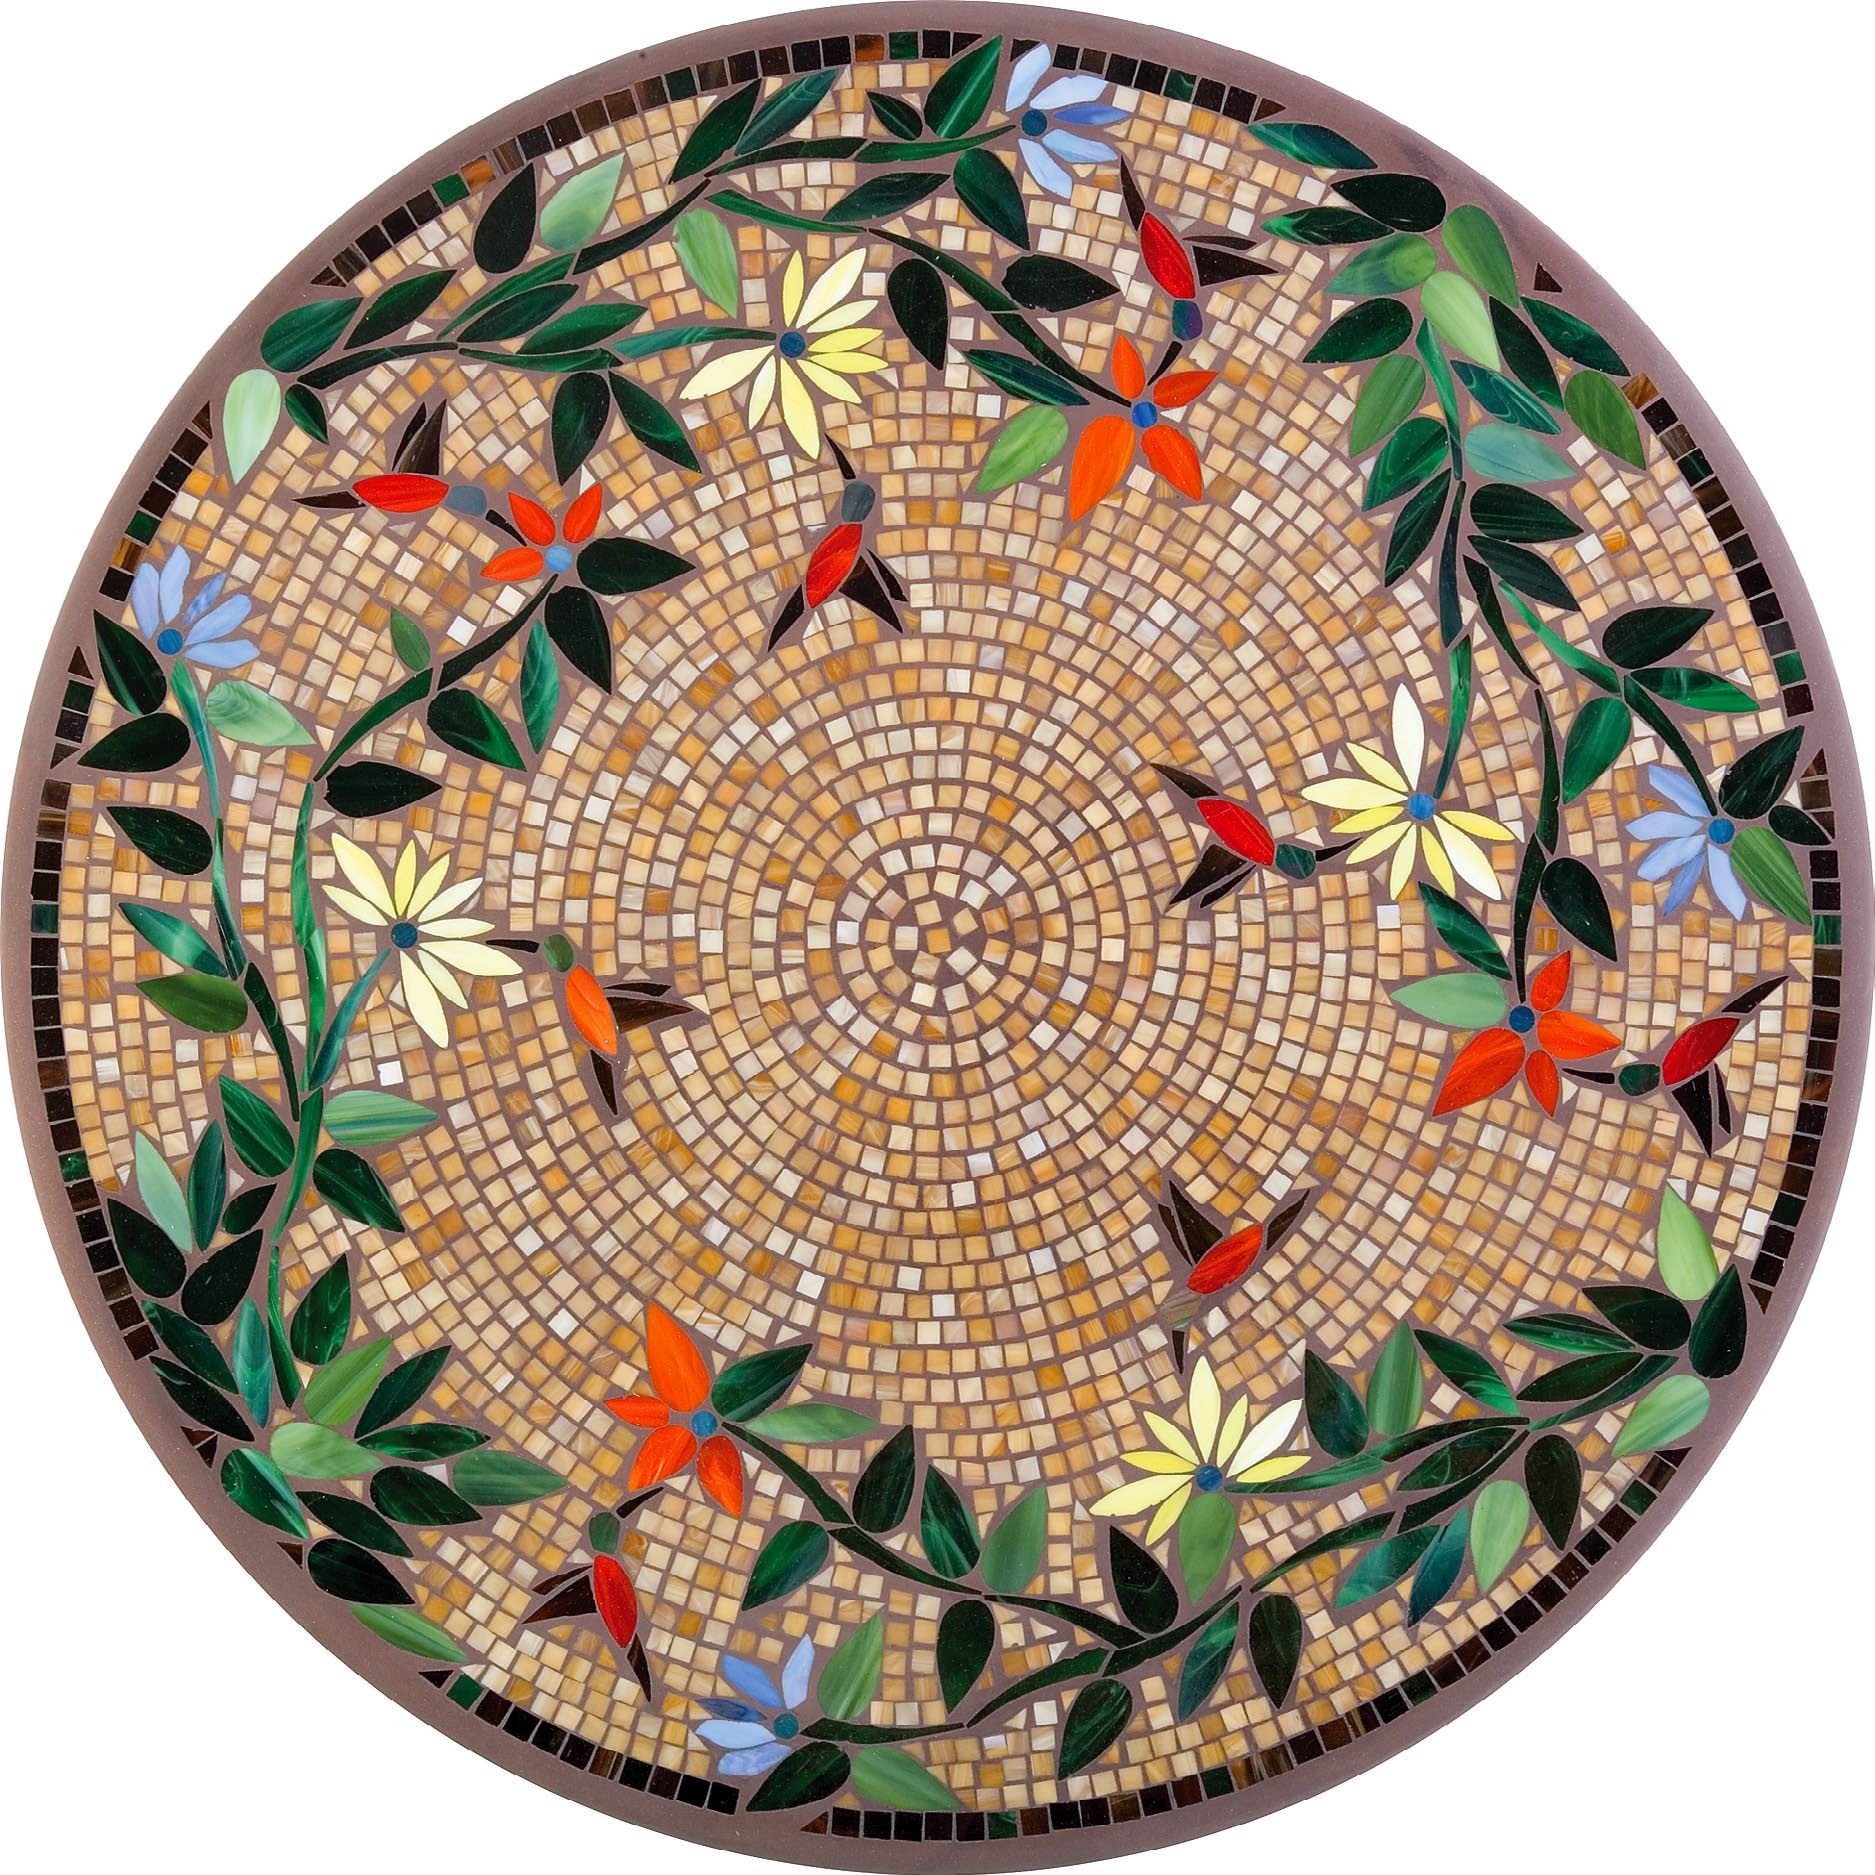 Mosaic Tables -   Awesome Mosaic Tables Ideas